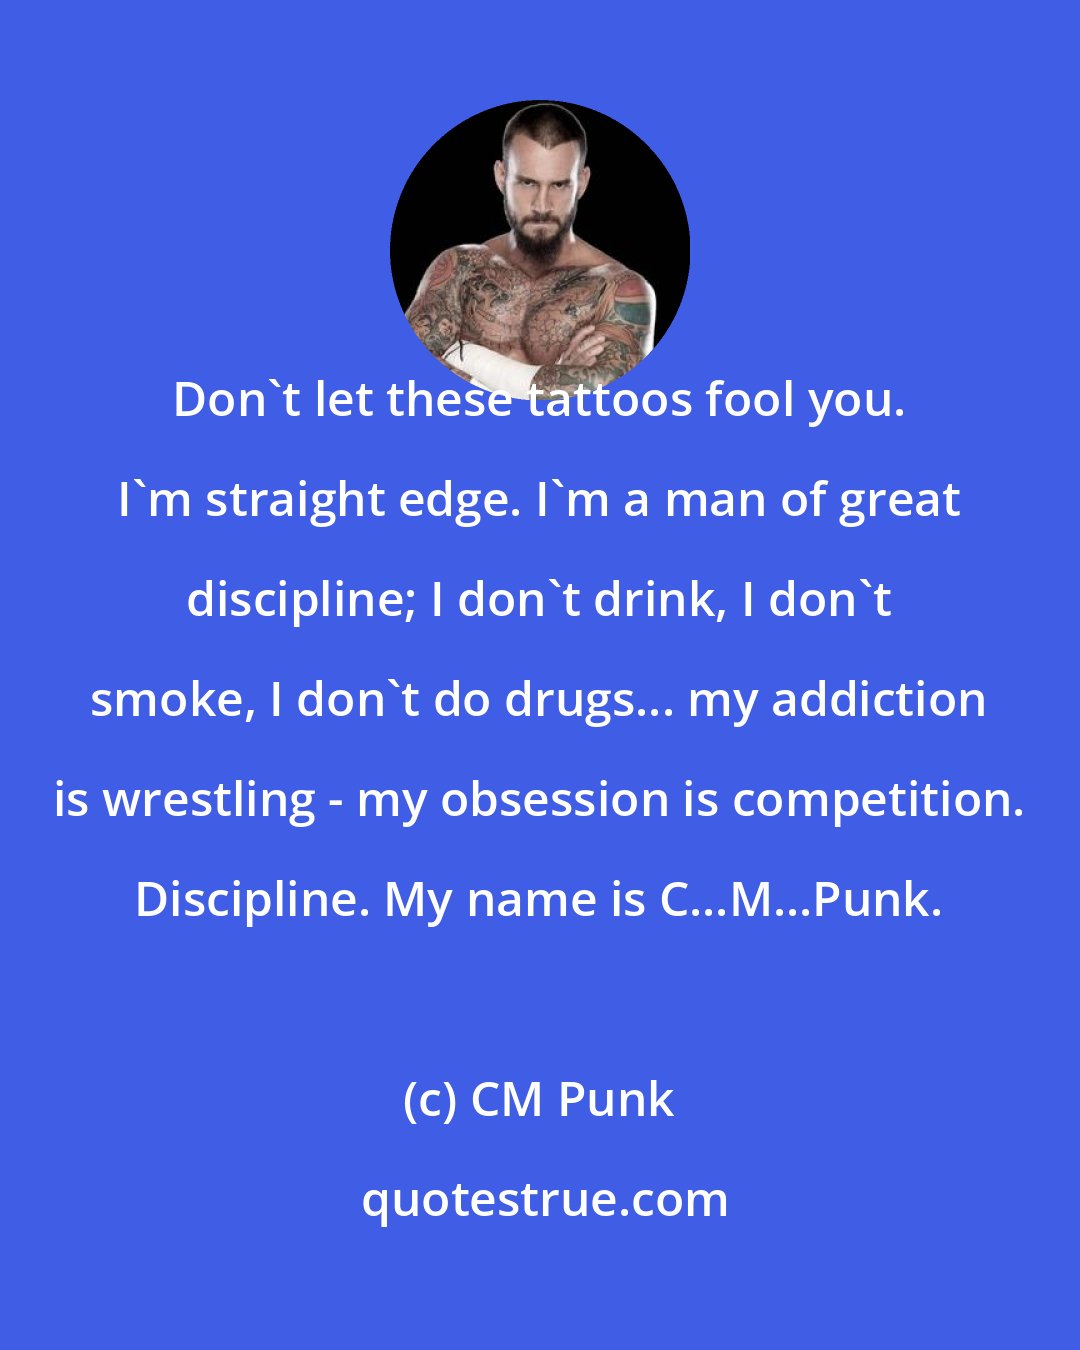 CM Punk: Don't let these tattoos fool you. I'm straight edge. I'm a man of great discipline; I don't drink, I don't smoke, I don't do drugs... my addiction is wrestling - my obsession is competition. Discipline. My name is C...M...Punk.